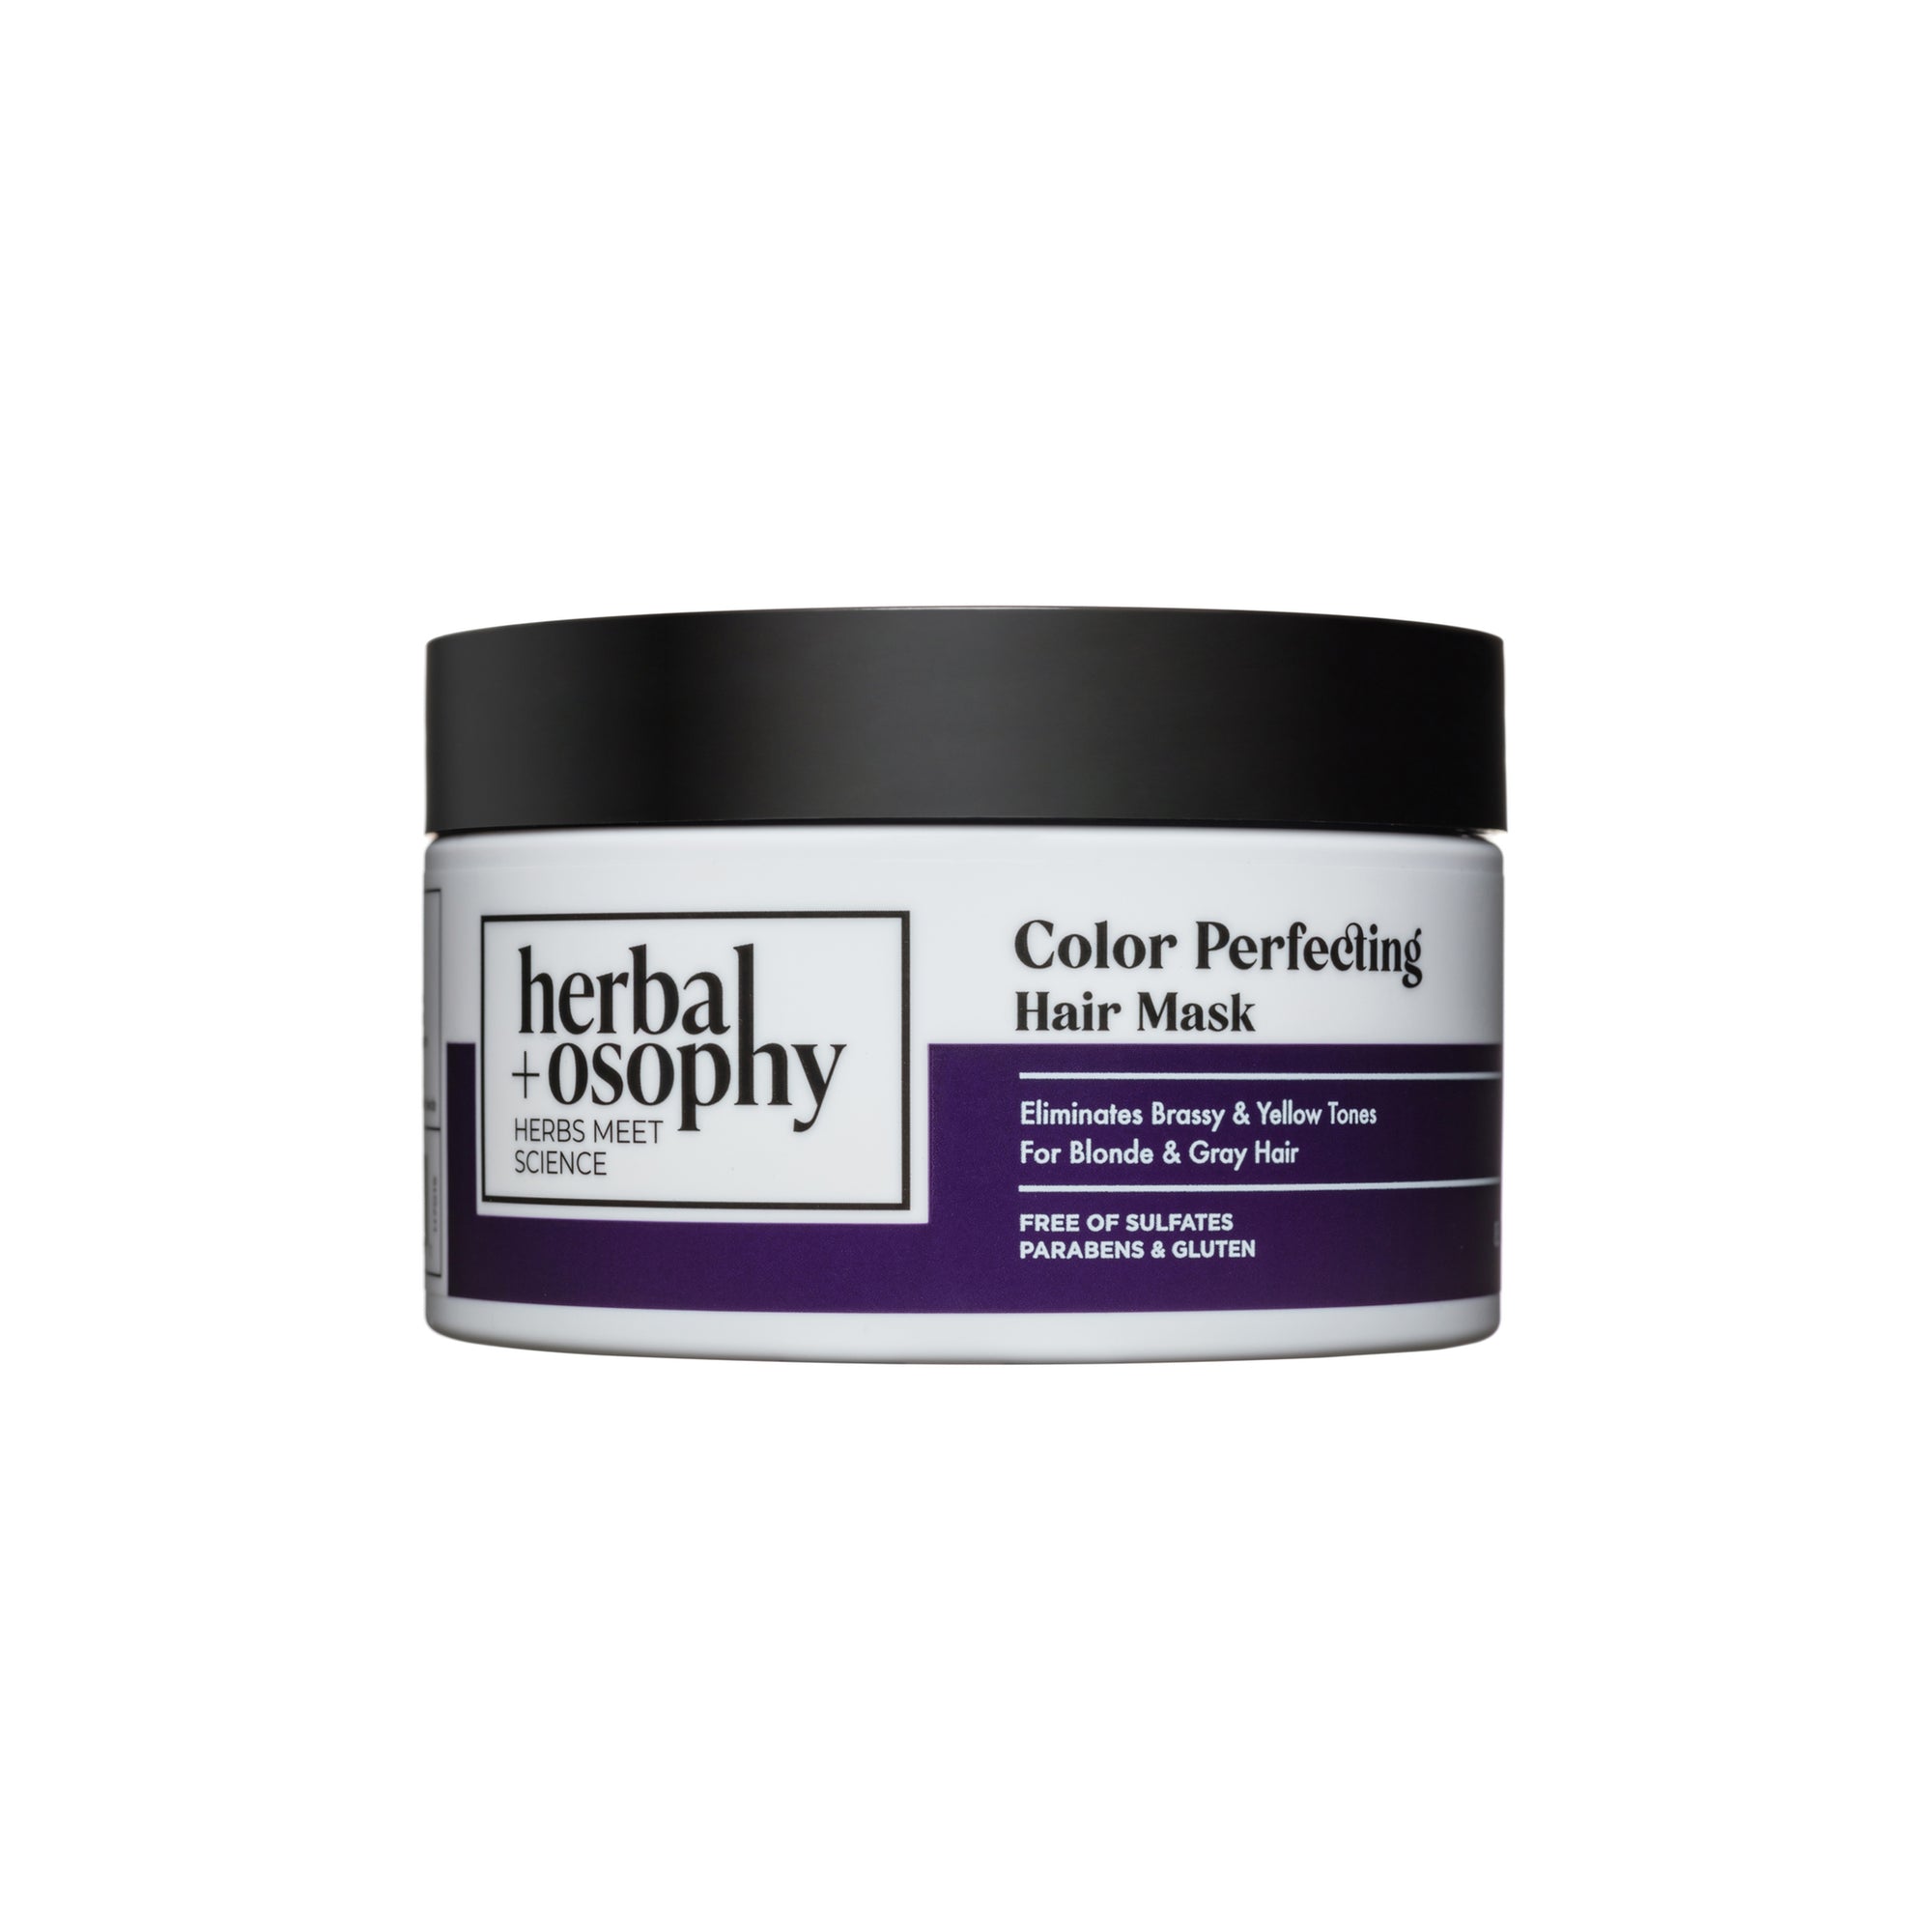 Herbalosophy Color Perfecting Hair Mask jar front